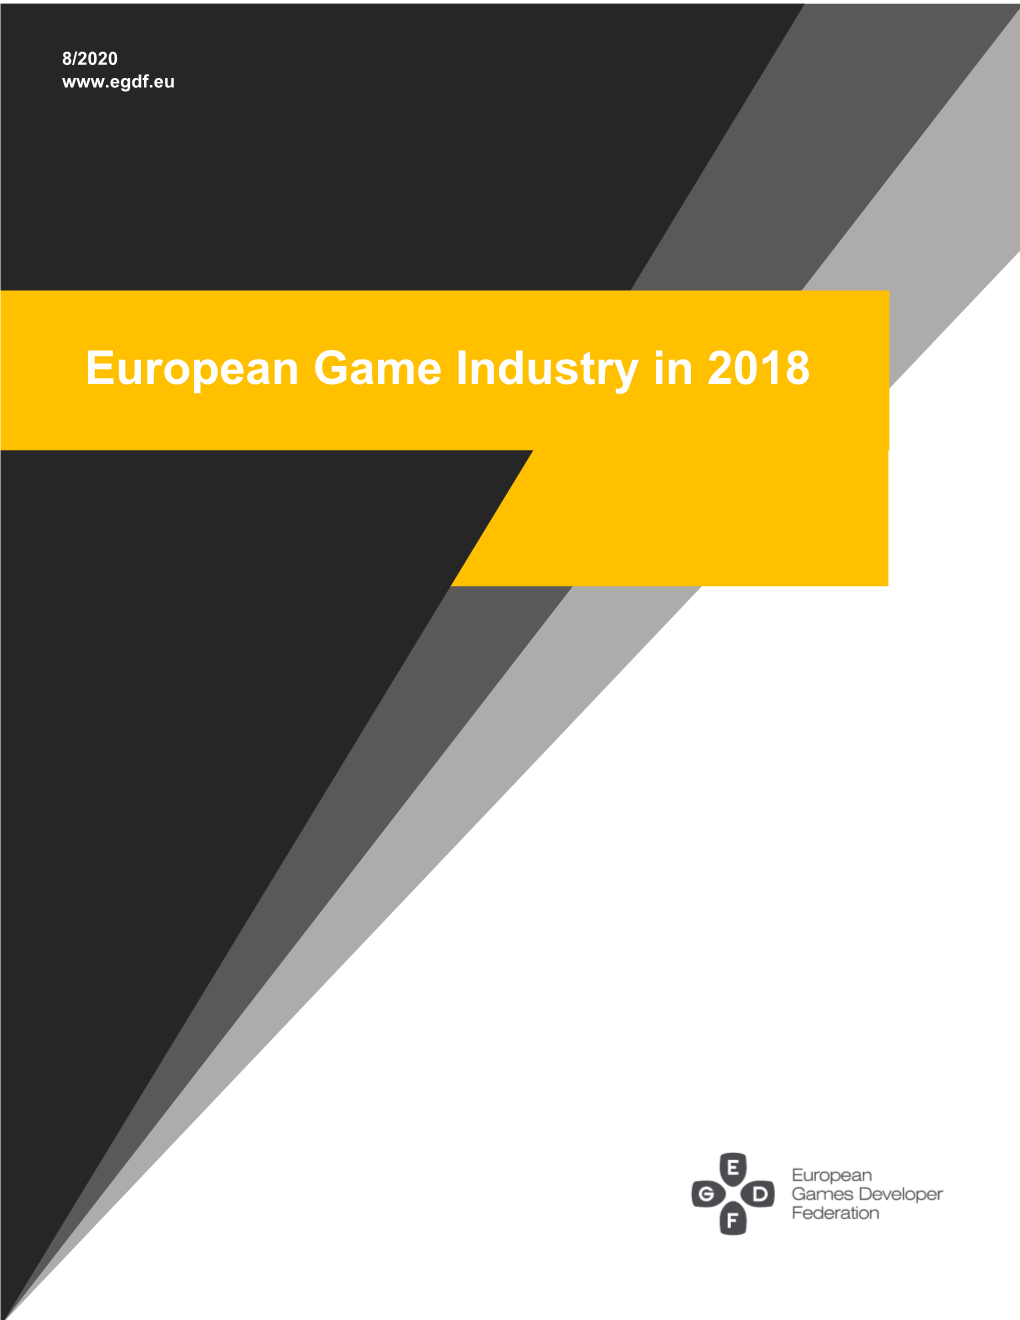 European Report on the Game Development Industry in 2018